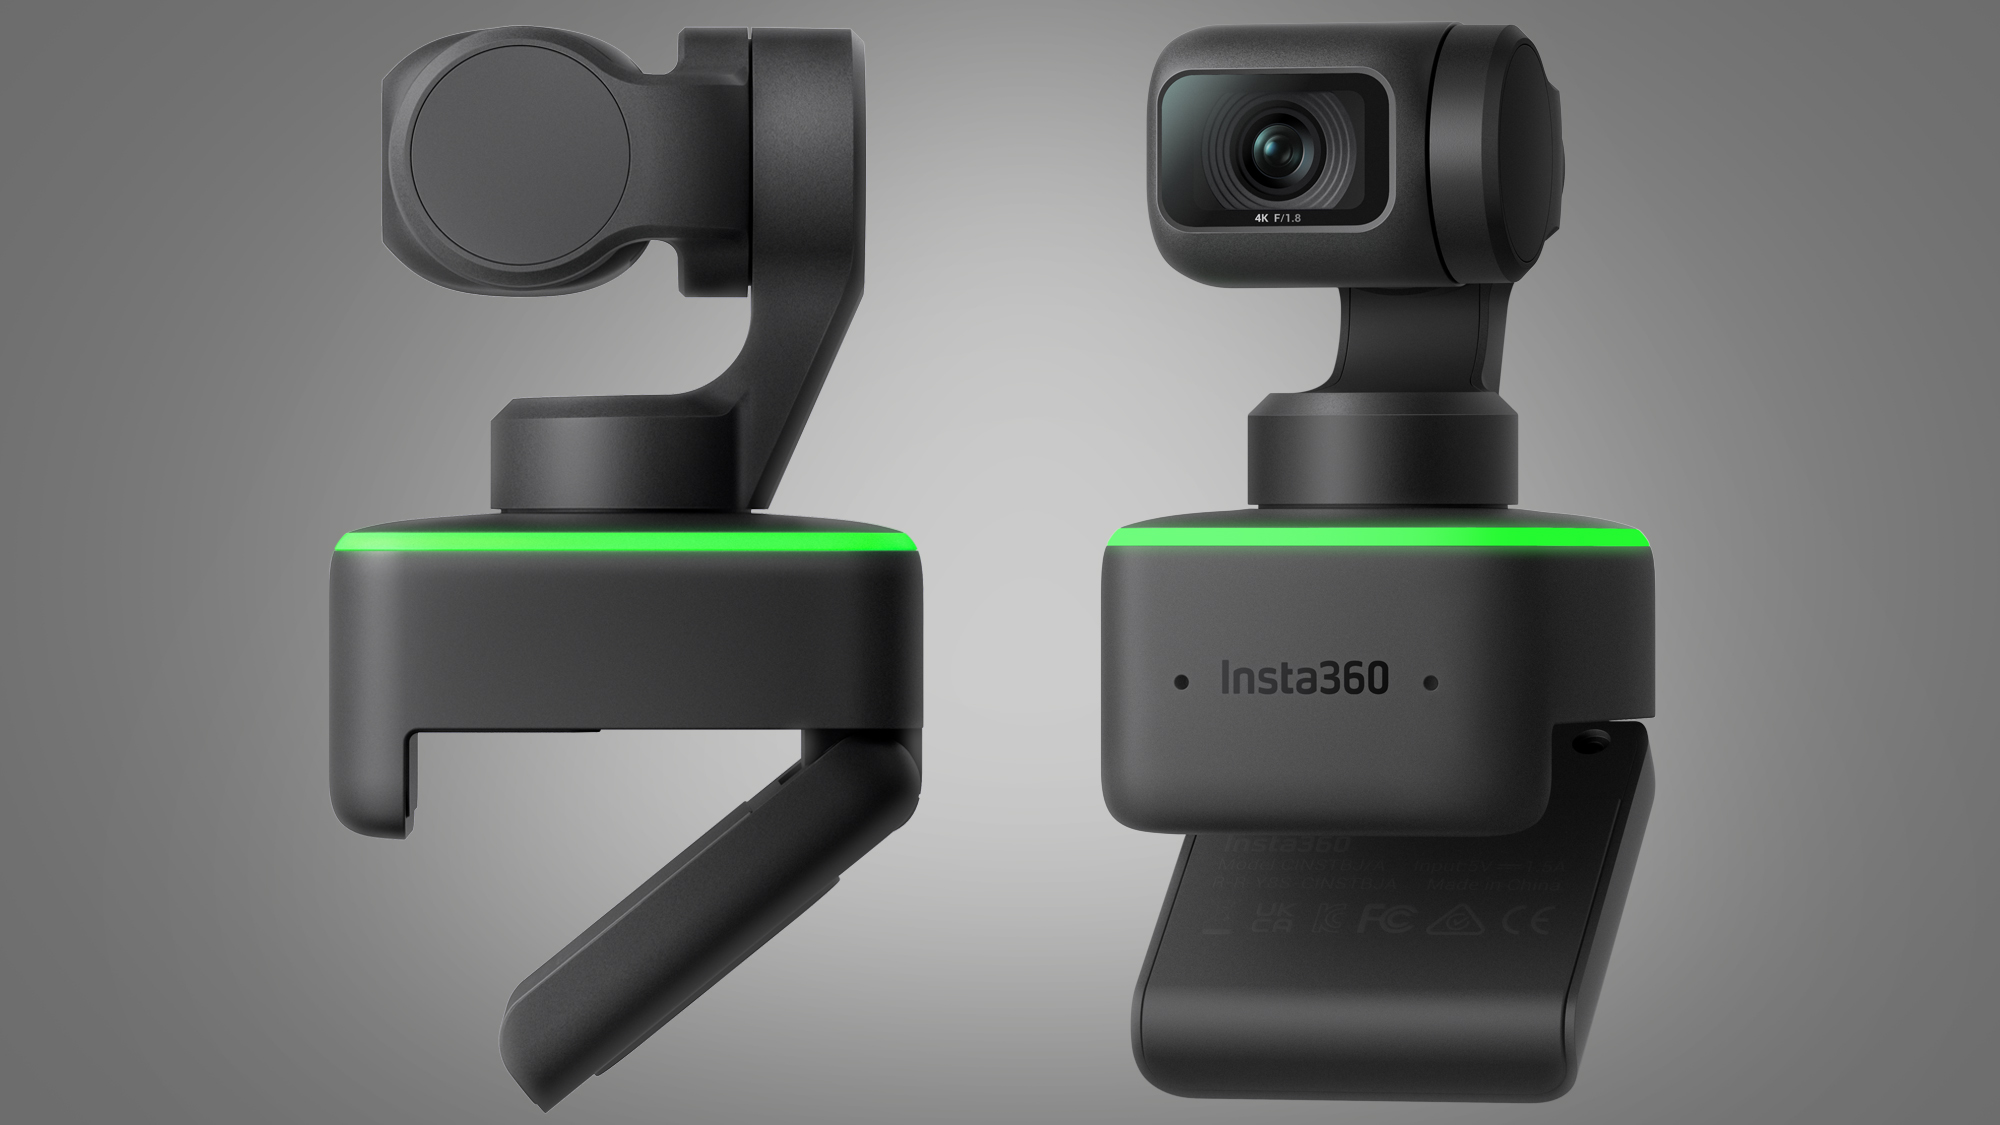 The side and front of the Insta360 Link webcam on a grey background